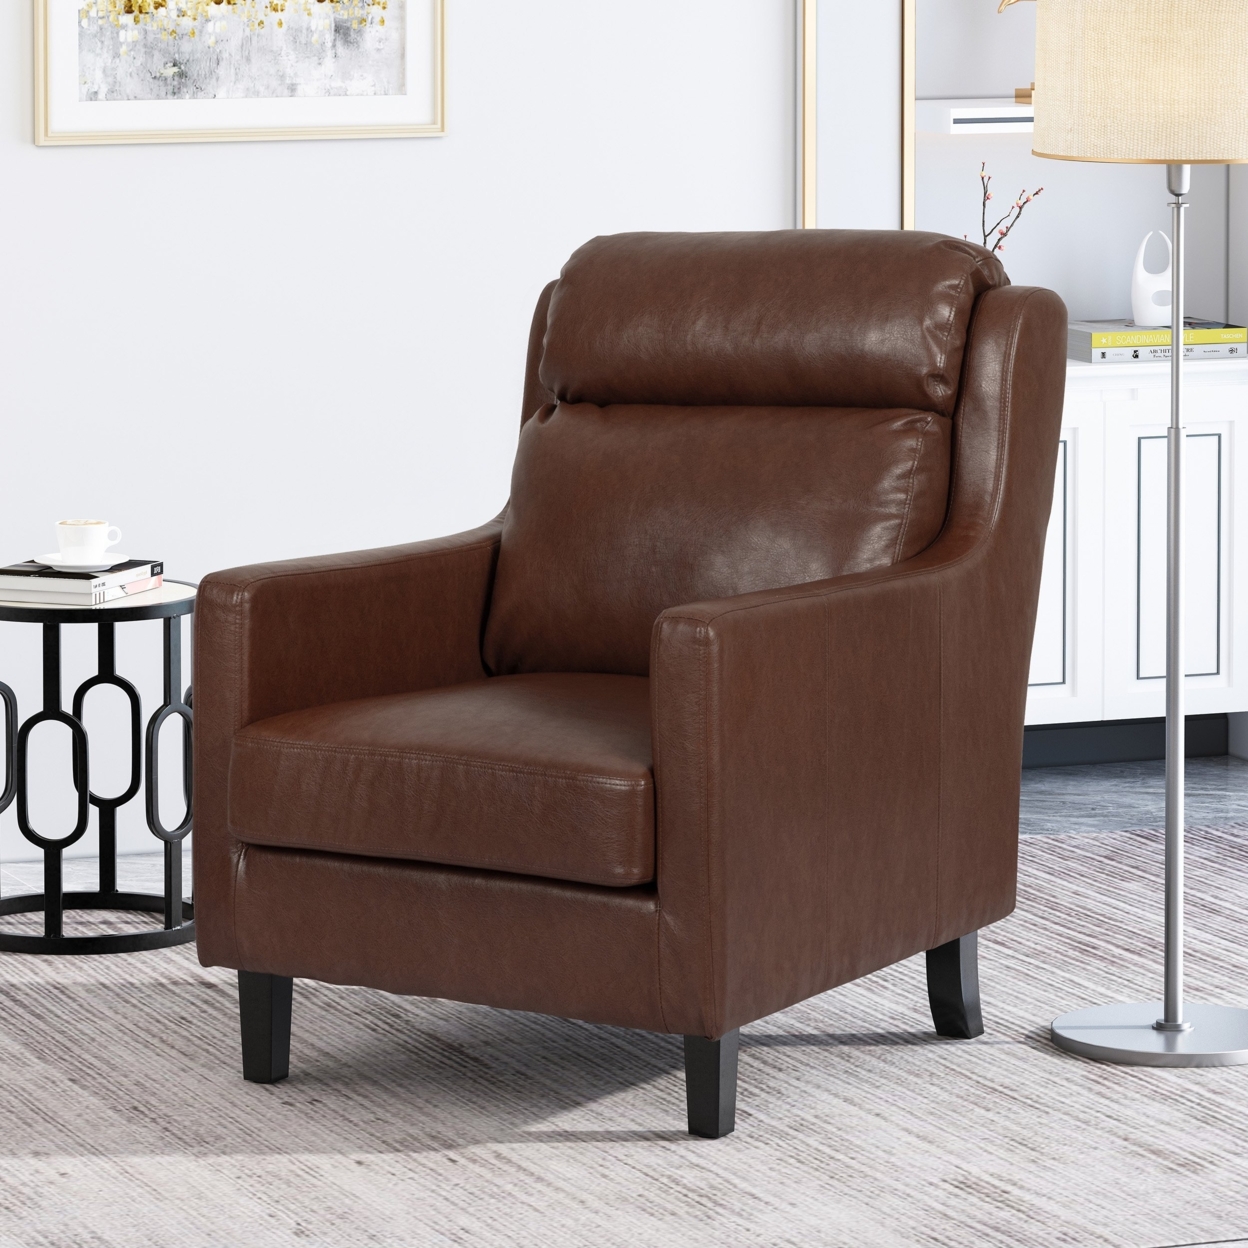 Baden Contemporary Pillow Tufted Faux Leather Club Chair - Cognac Brown